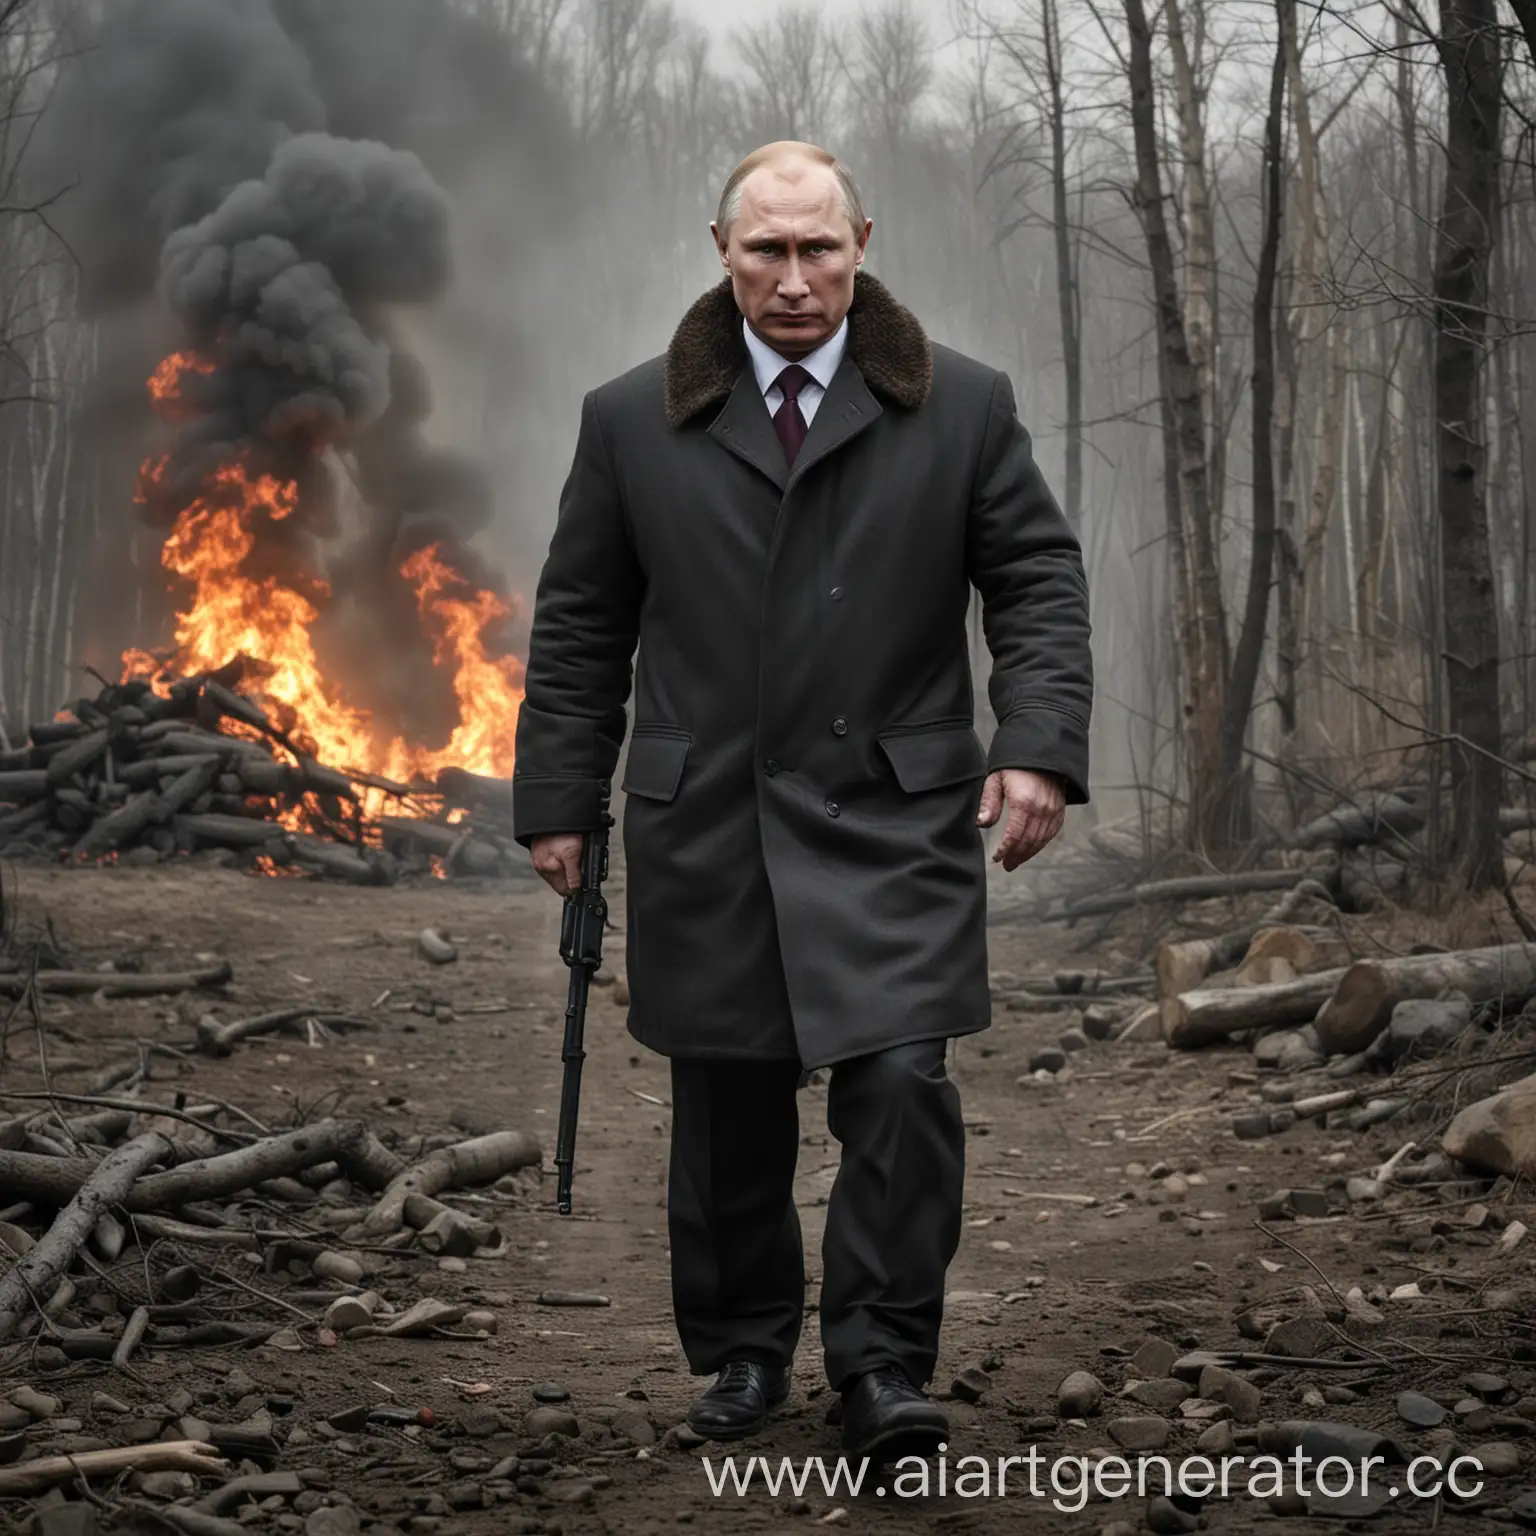 Putin's photo in the style of the film "Wrath of man"